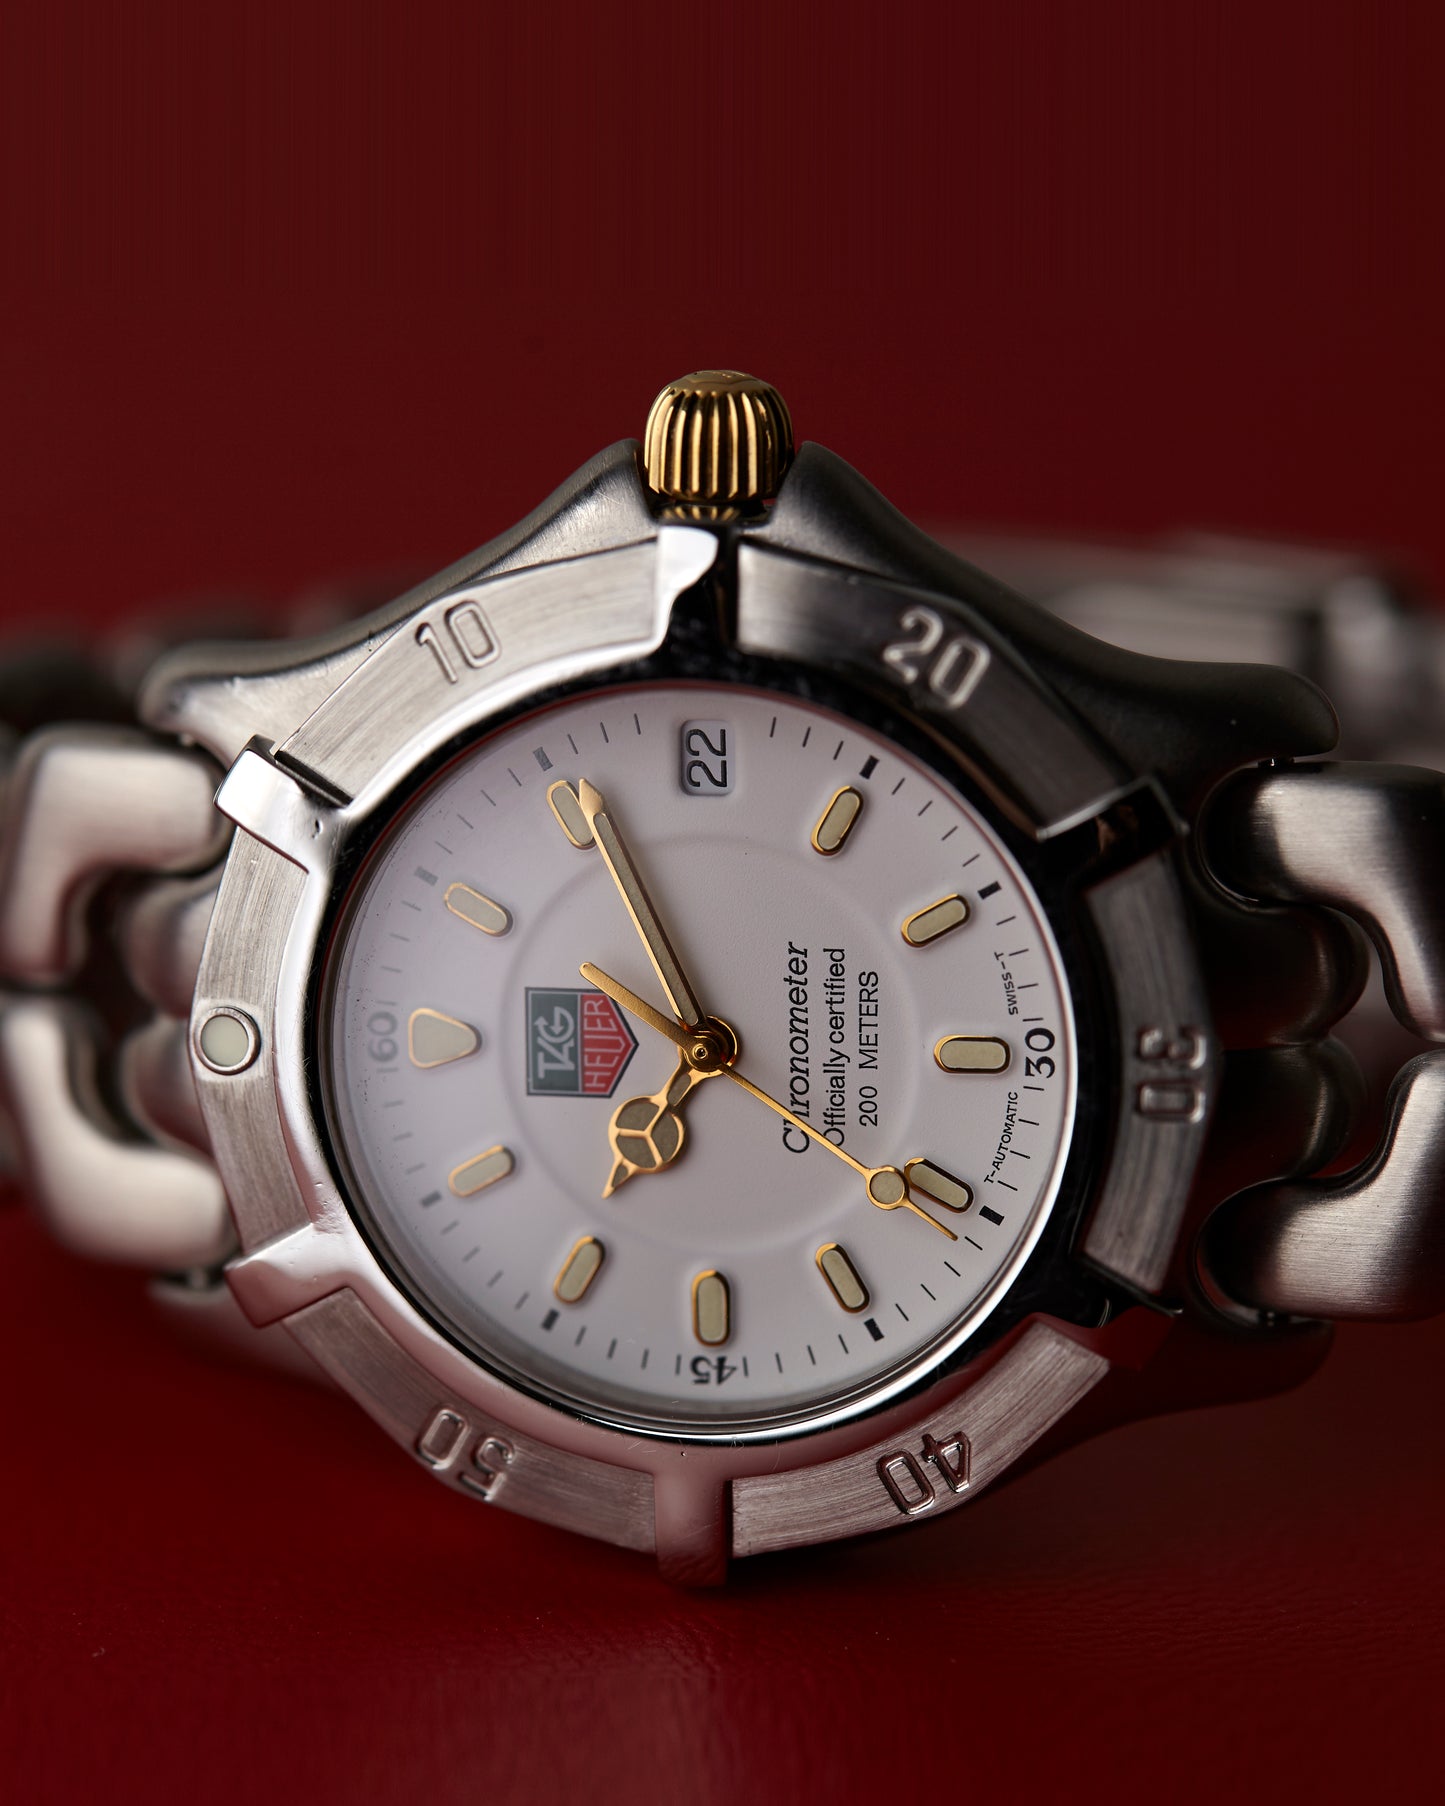 Tag Heuer Stainless Steel 200m Sports Diving Wristwatch